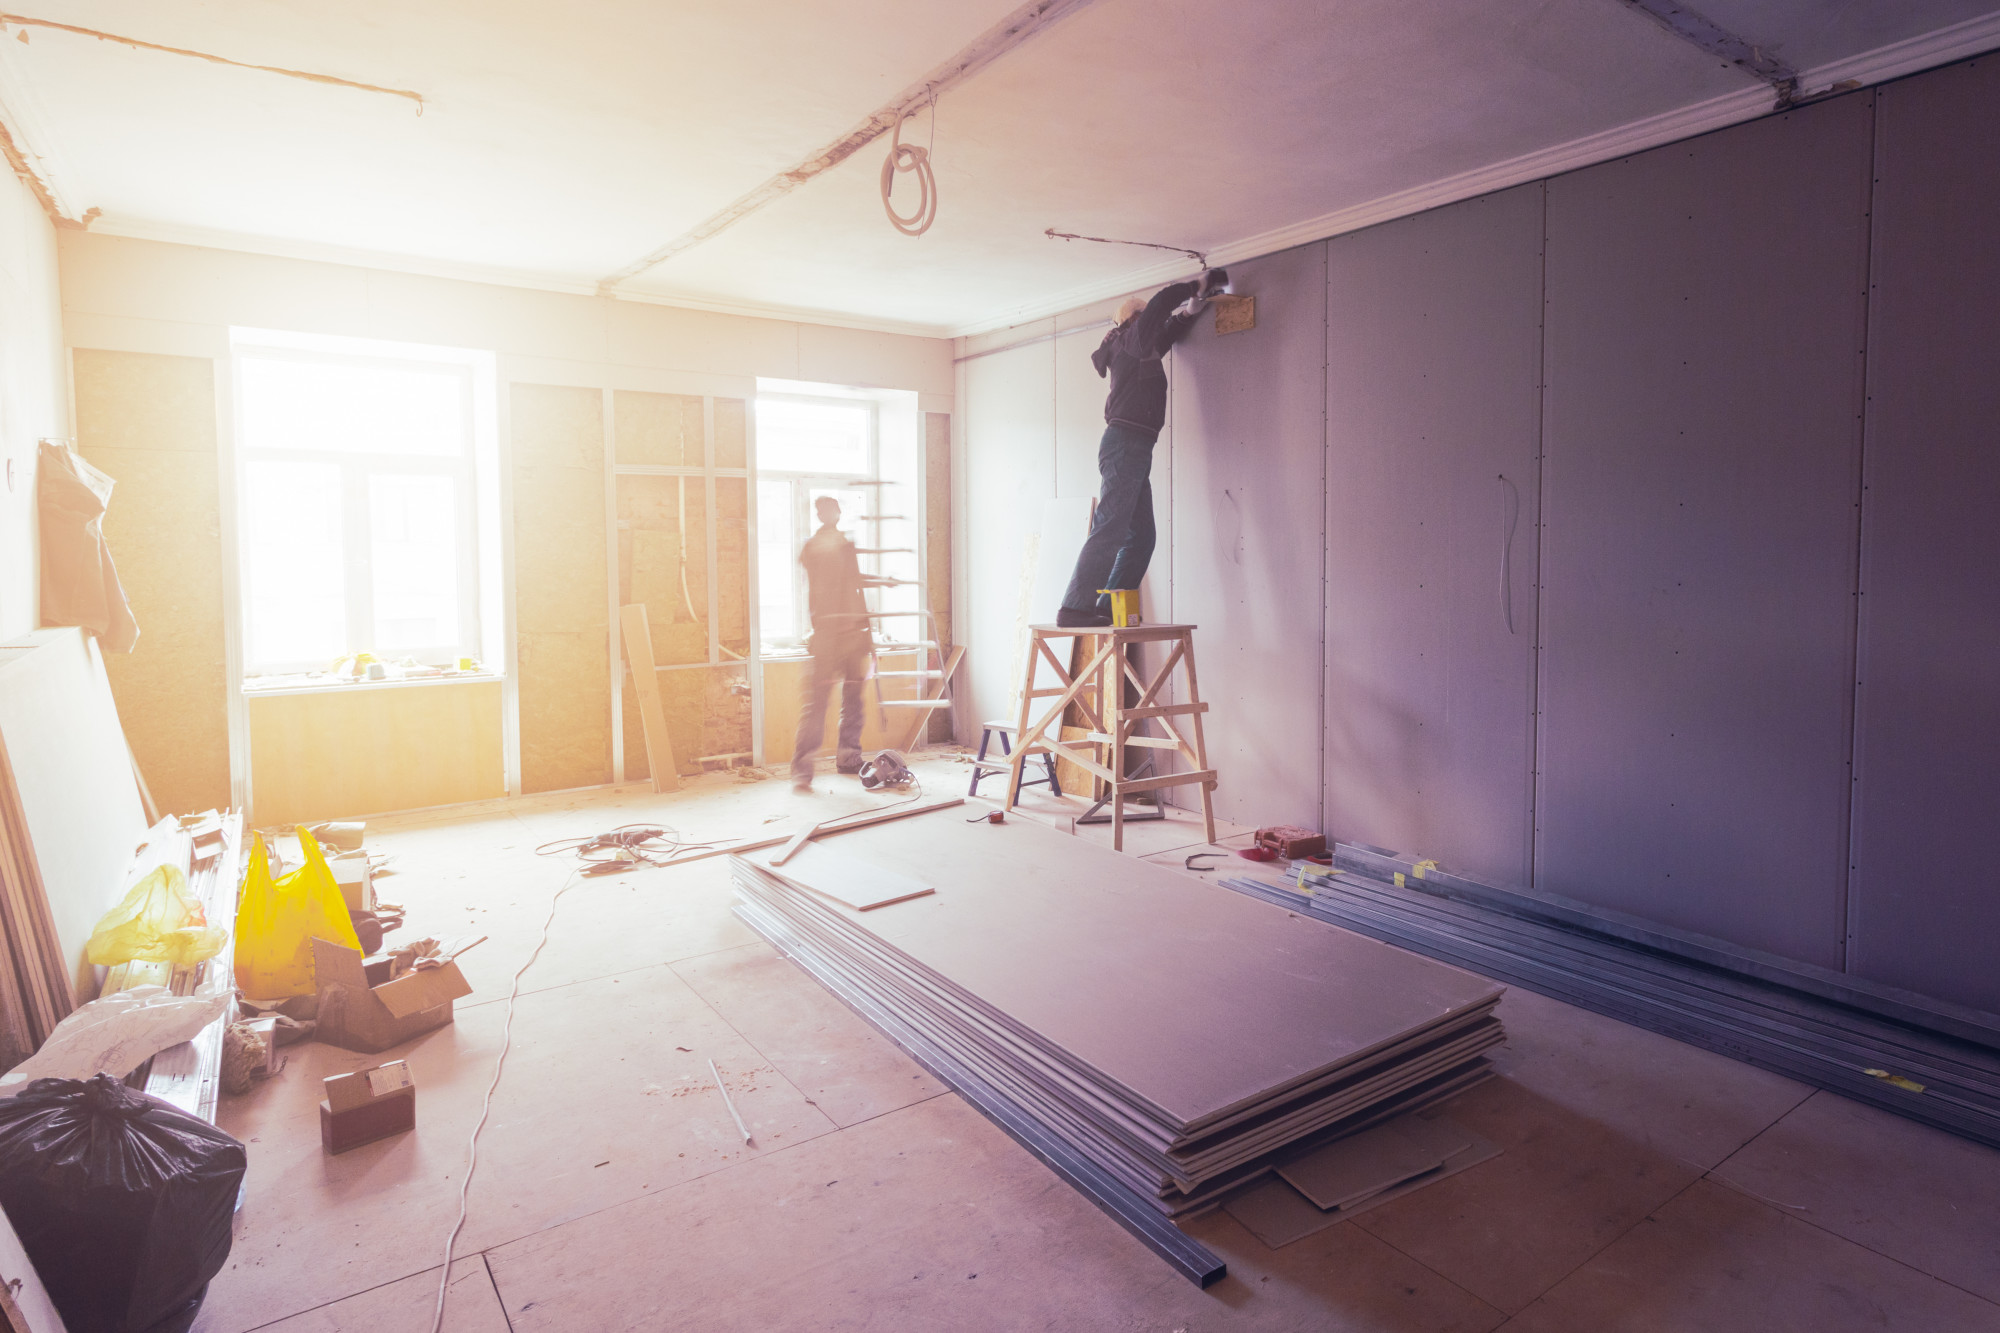 5 Home Upgrades to Improve Your Property Value